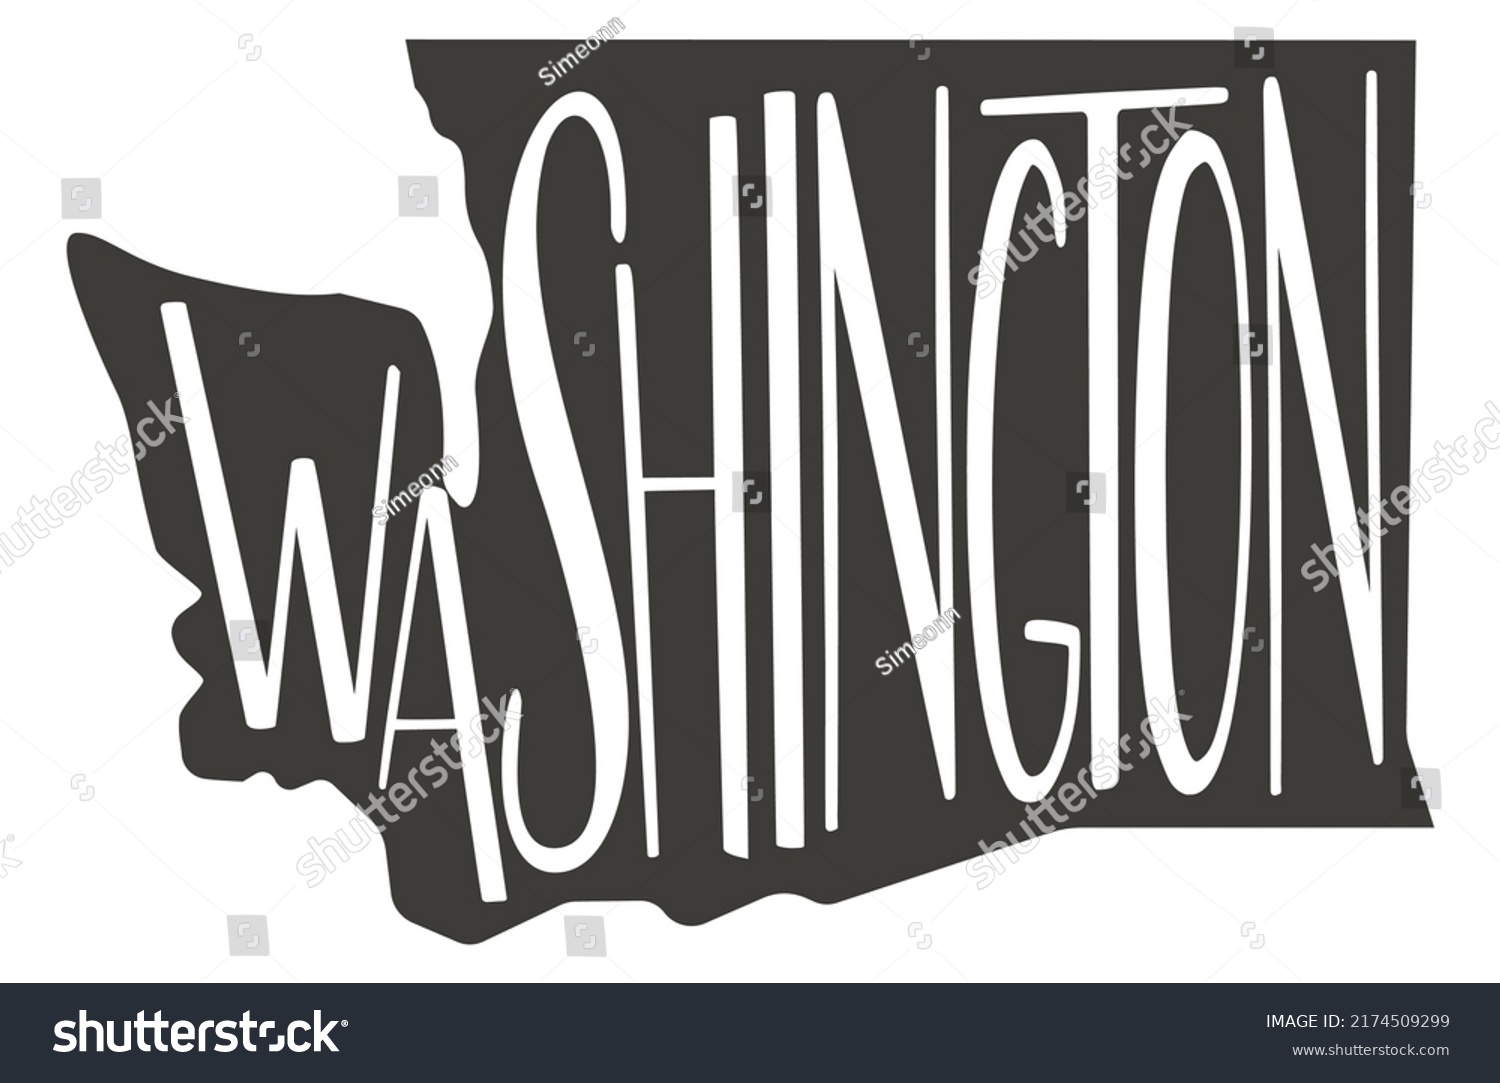 SVG of Washington state design map with text. Washington state map for poster, banner, t-shirt, tee. Washington silhouette state. Vector outline Isolated black illustratuon on a white background. svg